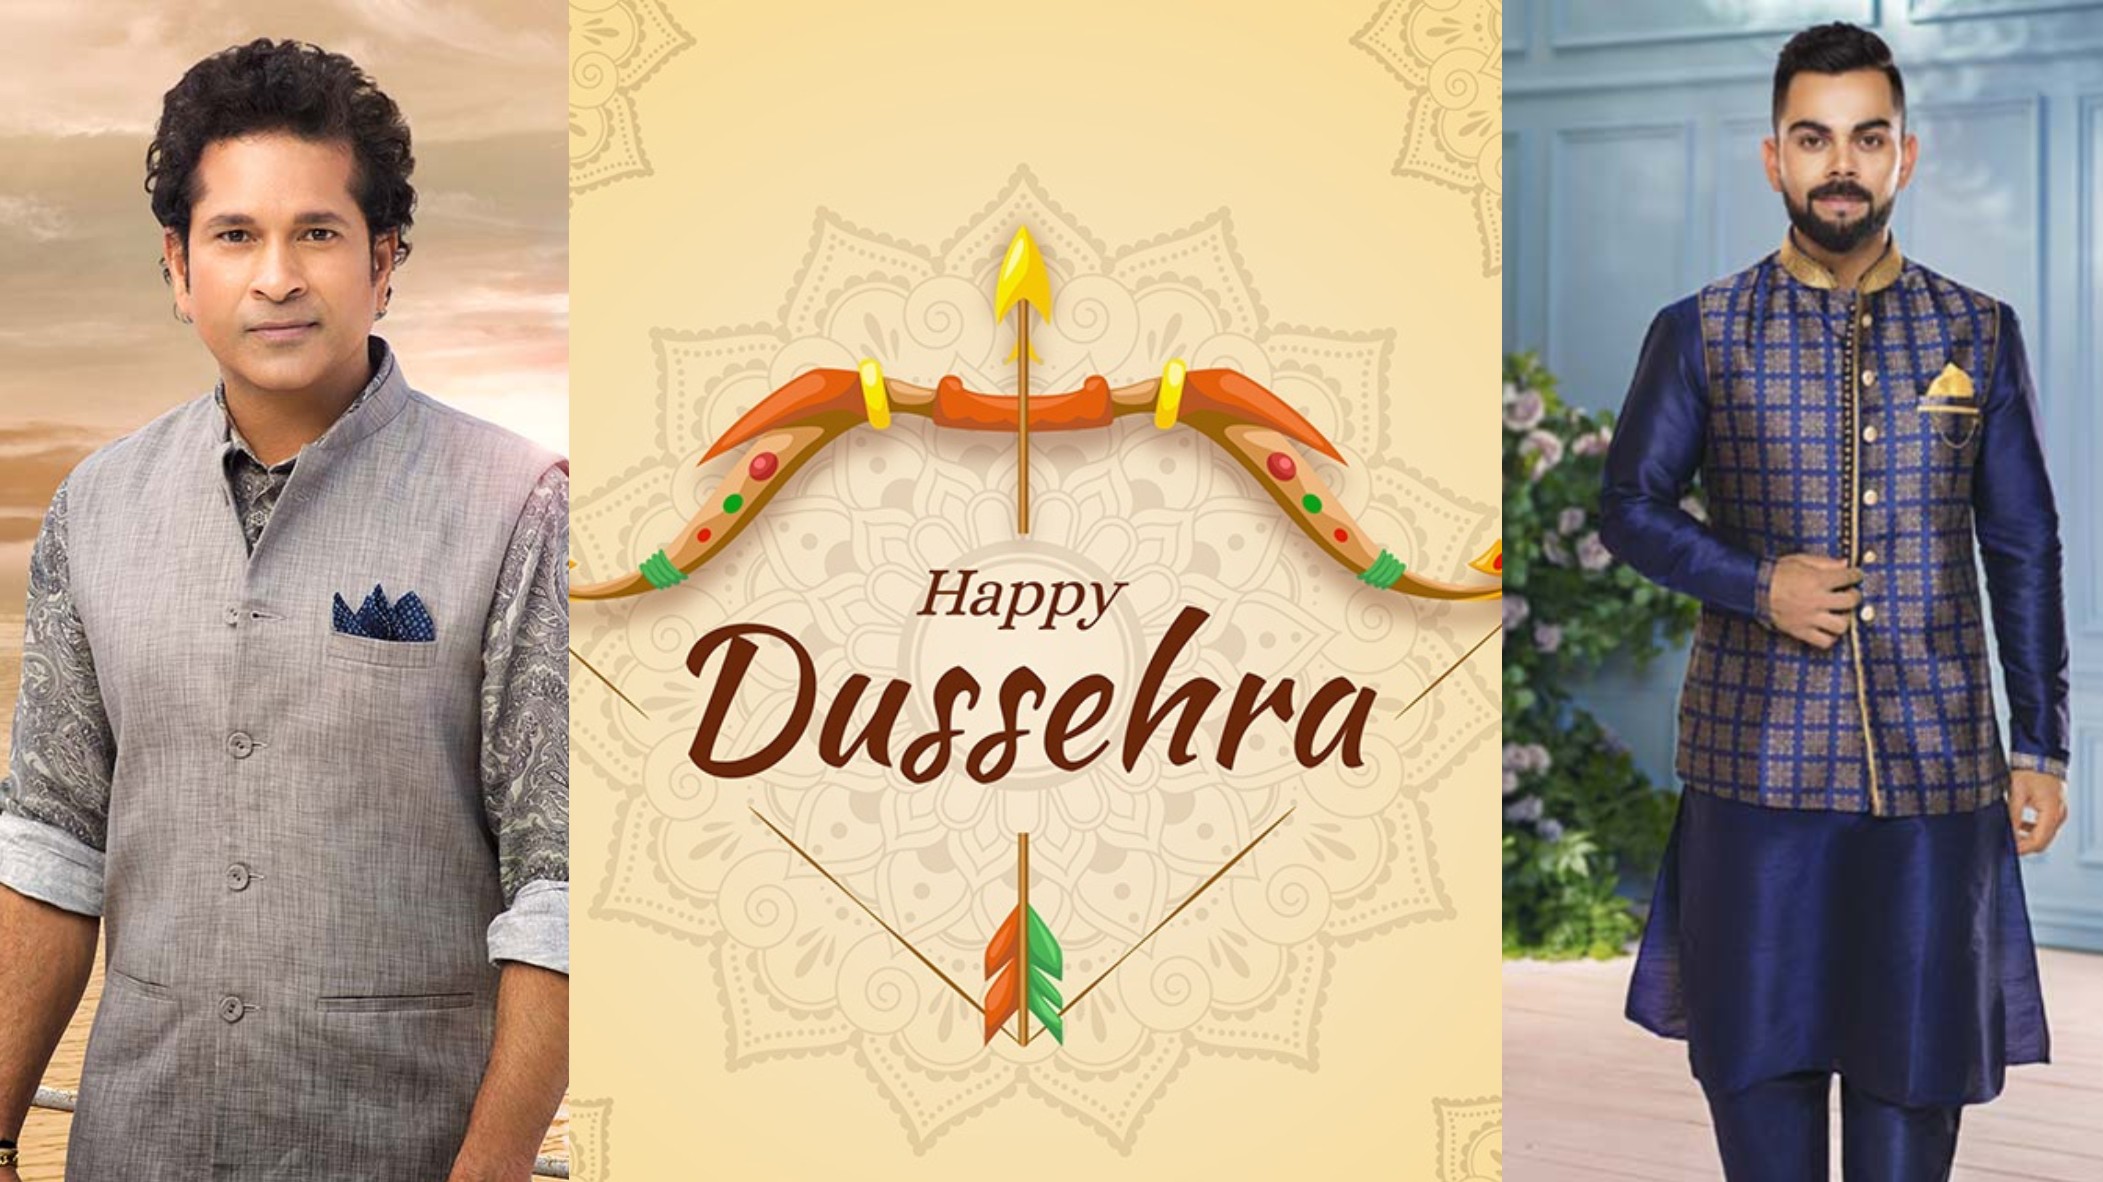 Indian cricket fraternity wishes the country on happy occasion of Dussehra